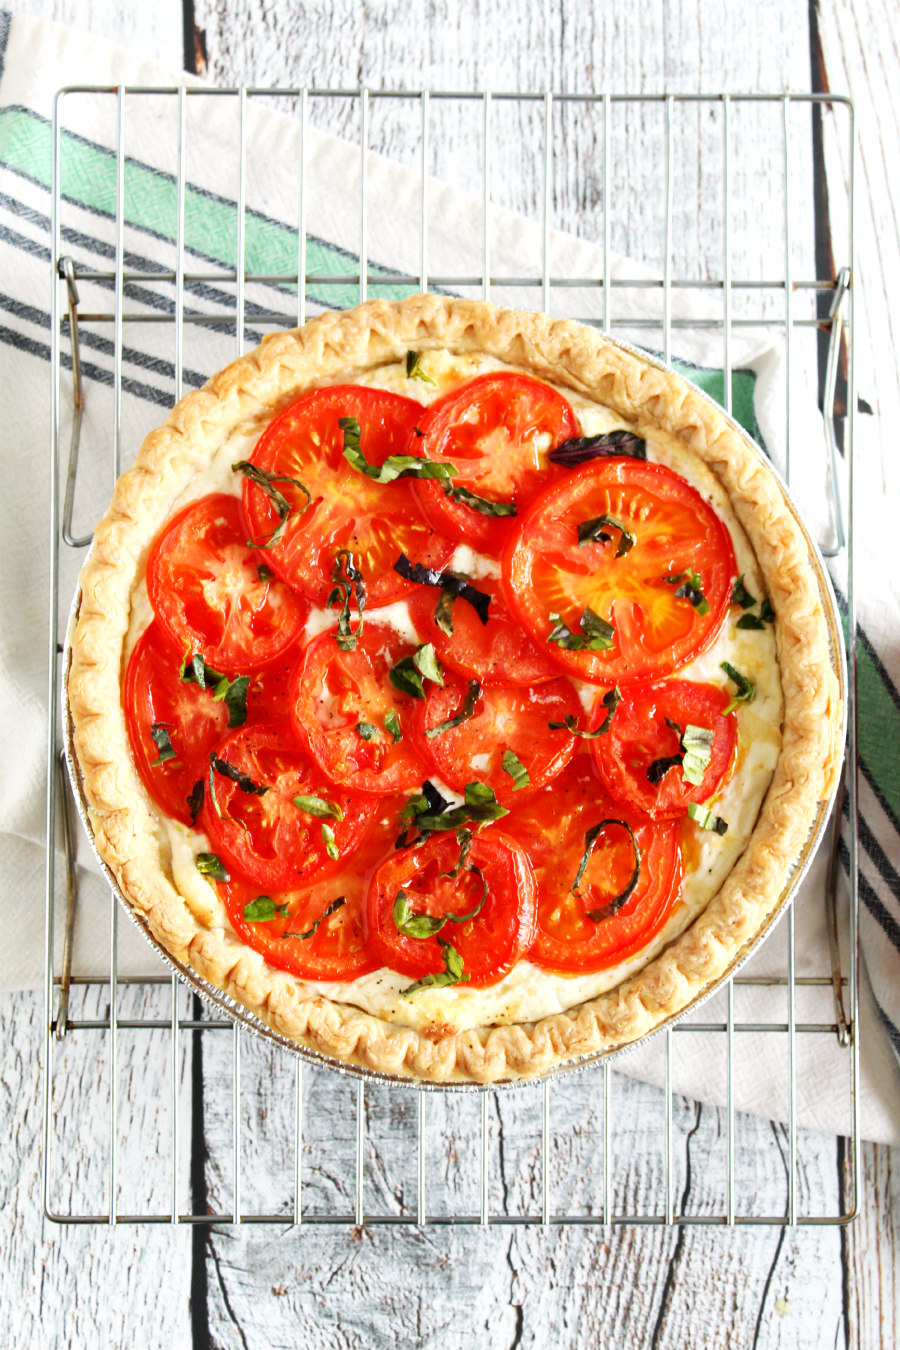 This beautiful Jersey Tomato 3-Cheese Tart is filled with a trio of cheeses and topped with fresh tomato slices and basil. It's the perfect vegetarian dish or party appetizer to make with fresh tomatoes from the farmers market or garden!